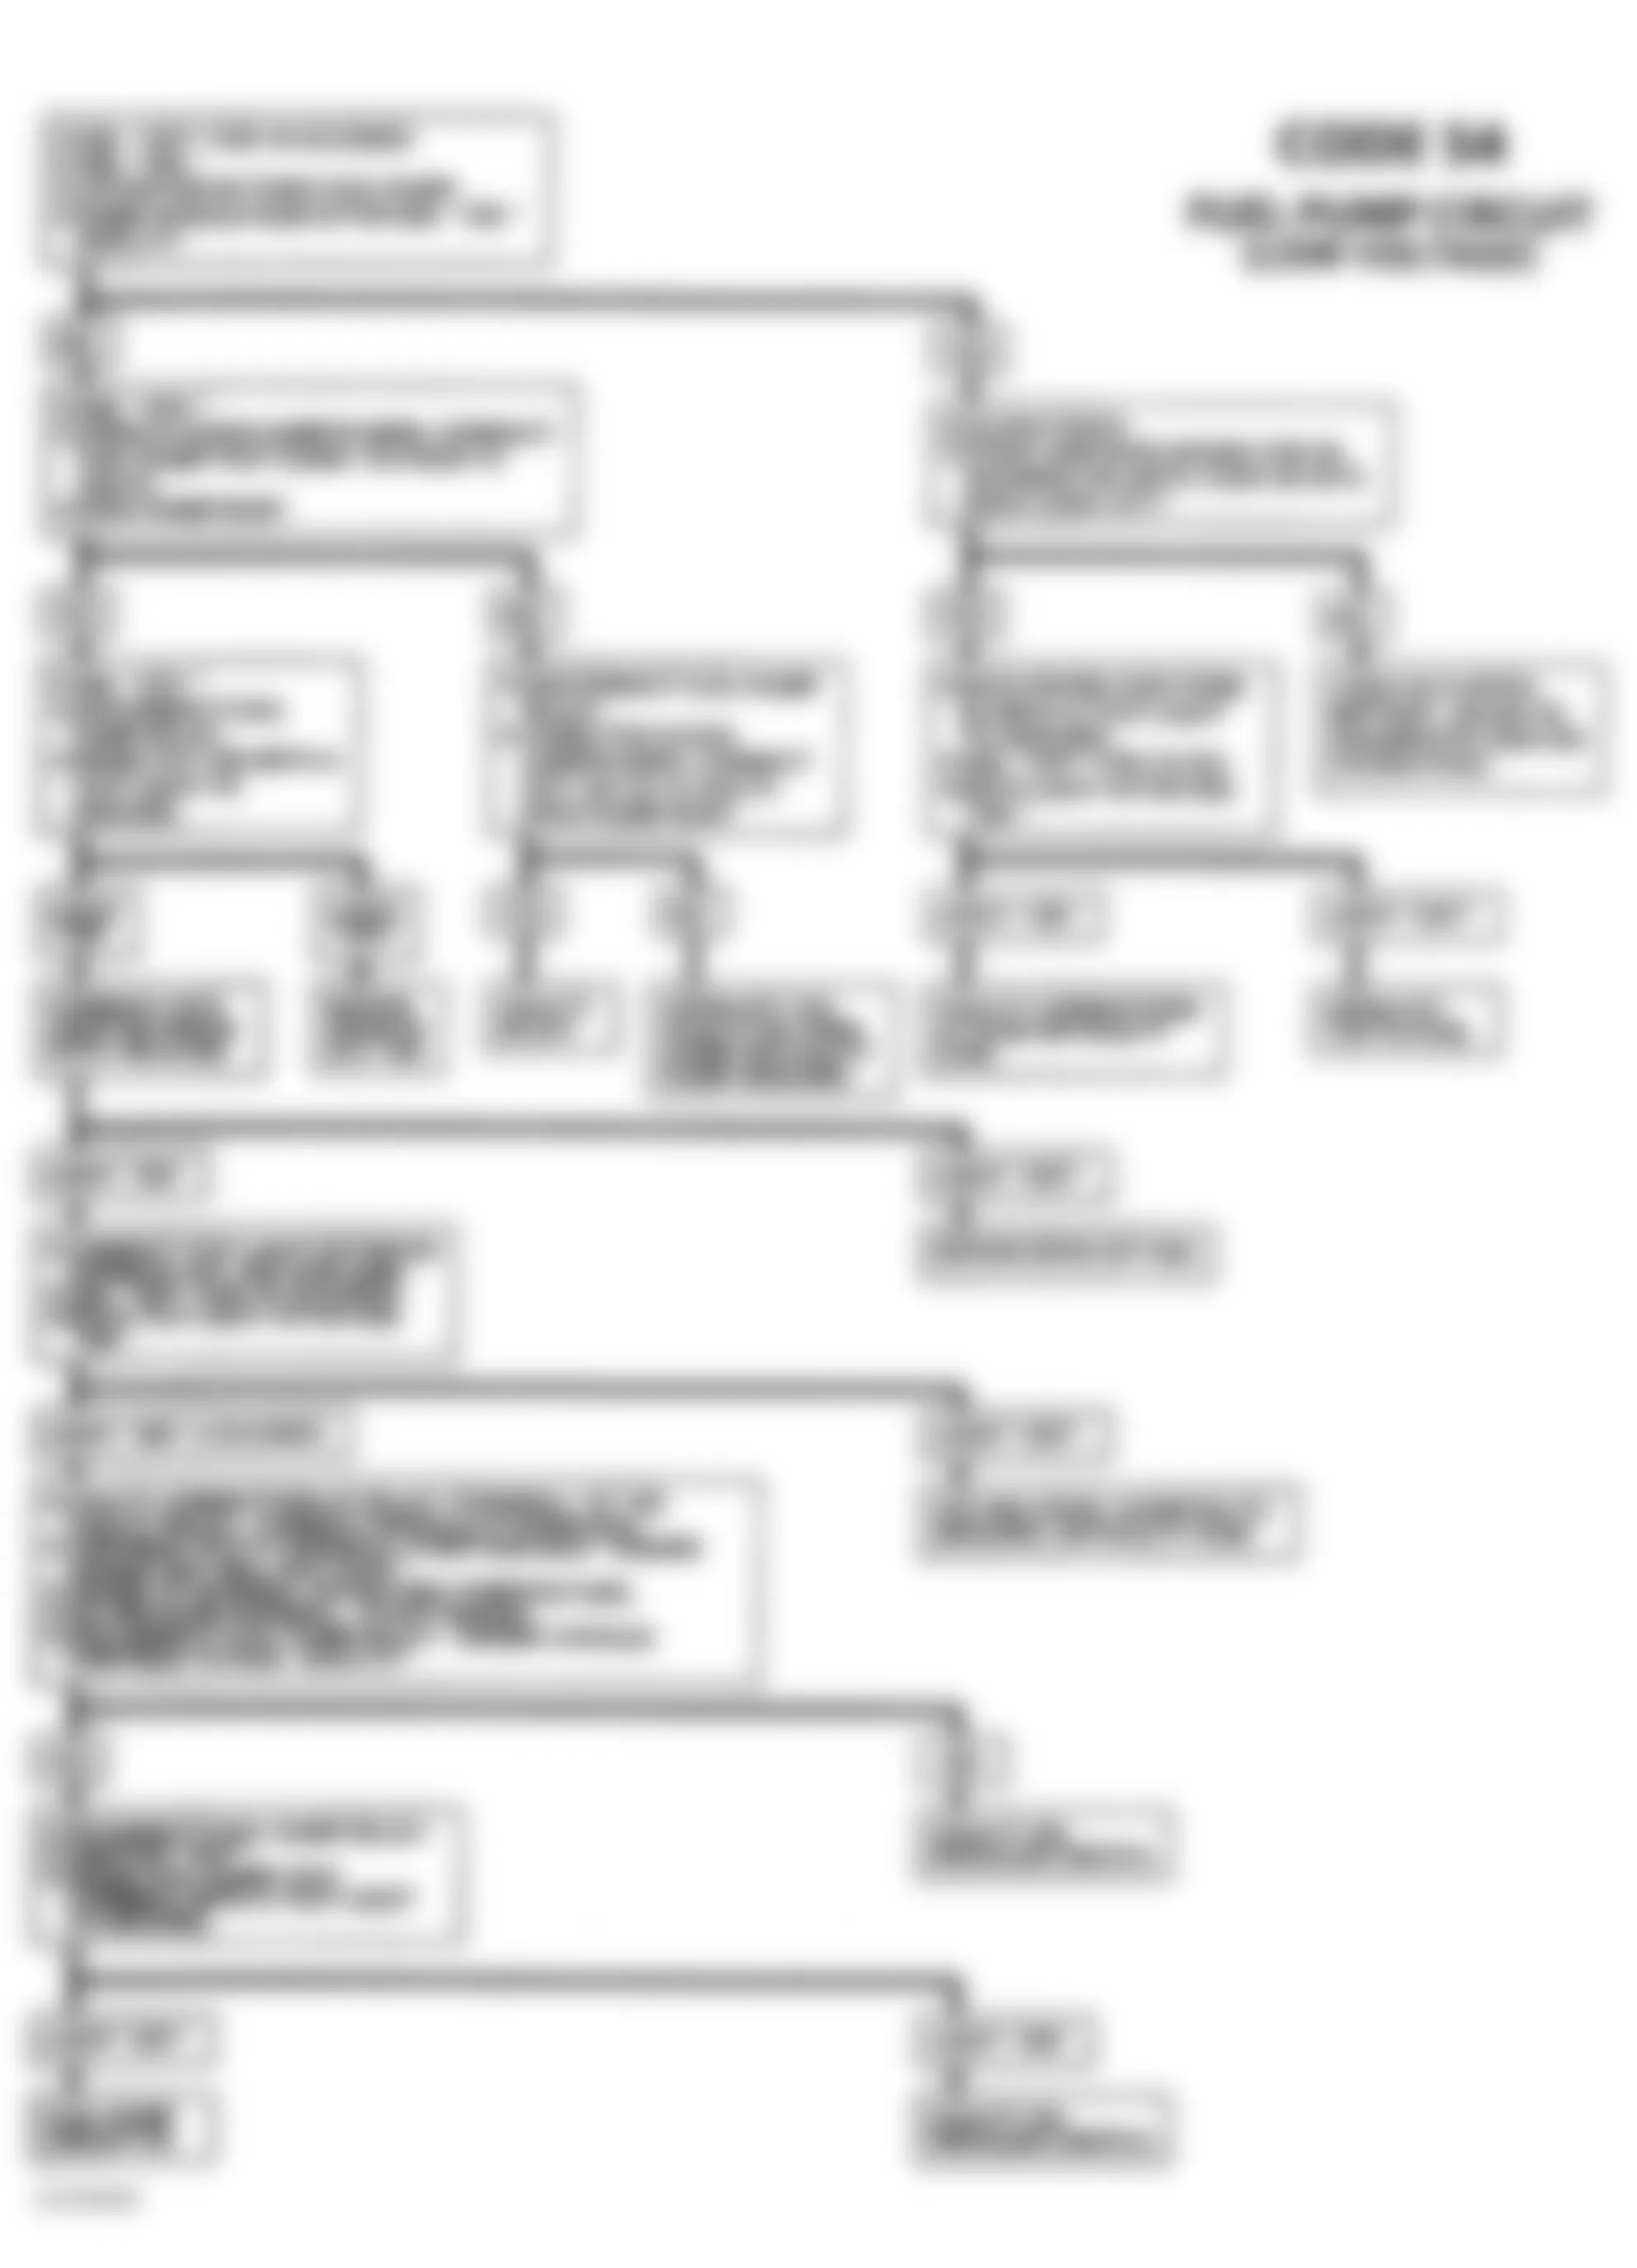 GMC Safari 1991 - Component Locations -  Code 54 Diagnostic Flow Chart (S & T Series Only)